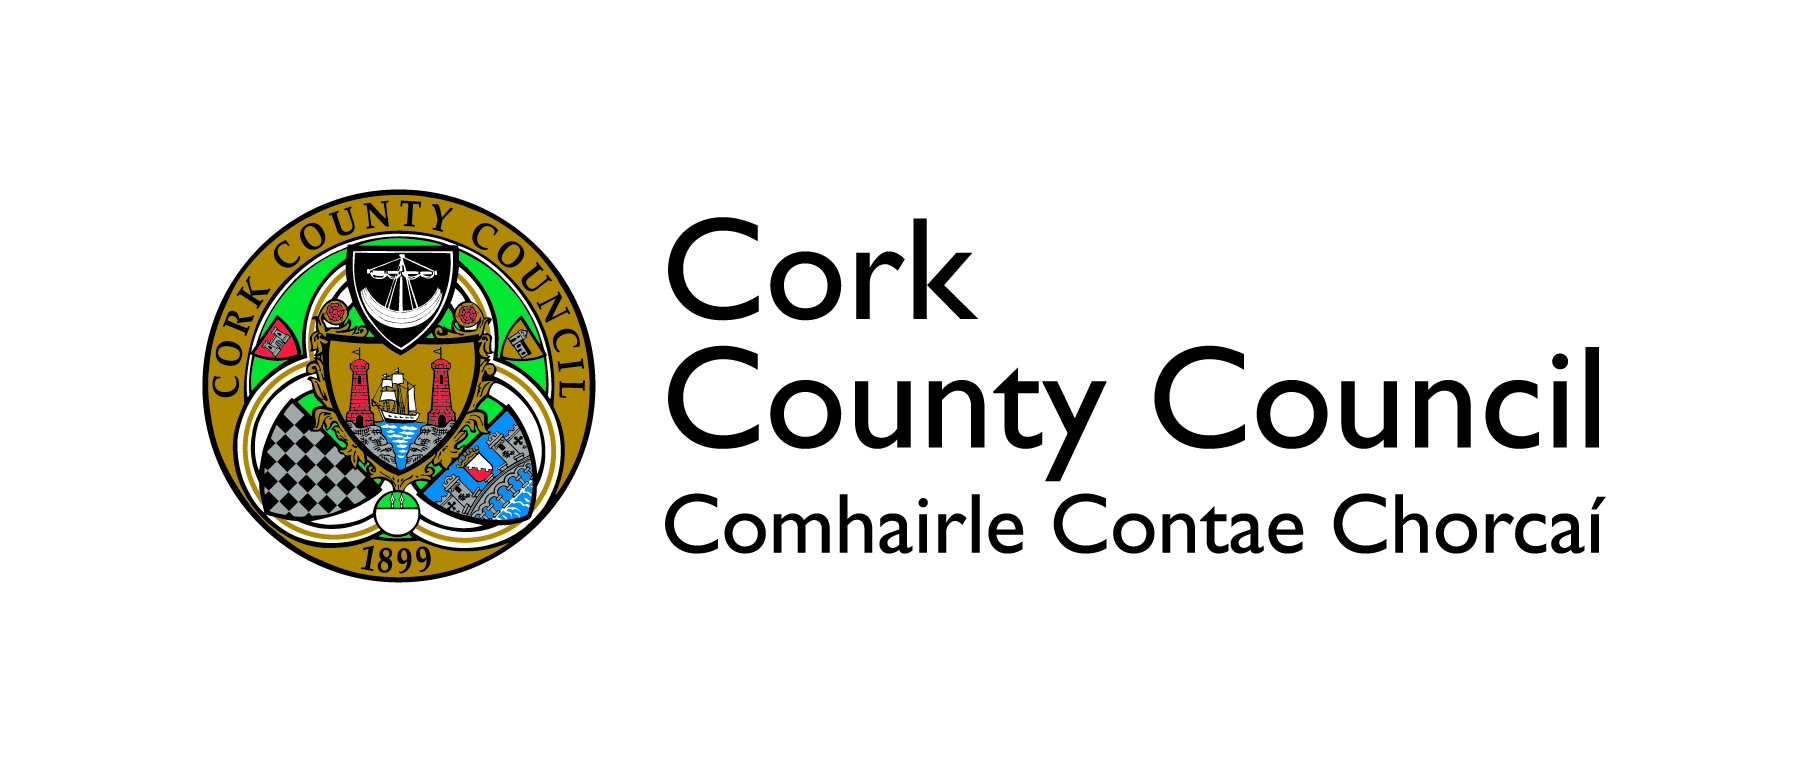 Small Business Assistance Scheme for Covid announced for County Cork Businesses